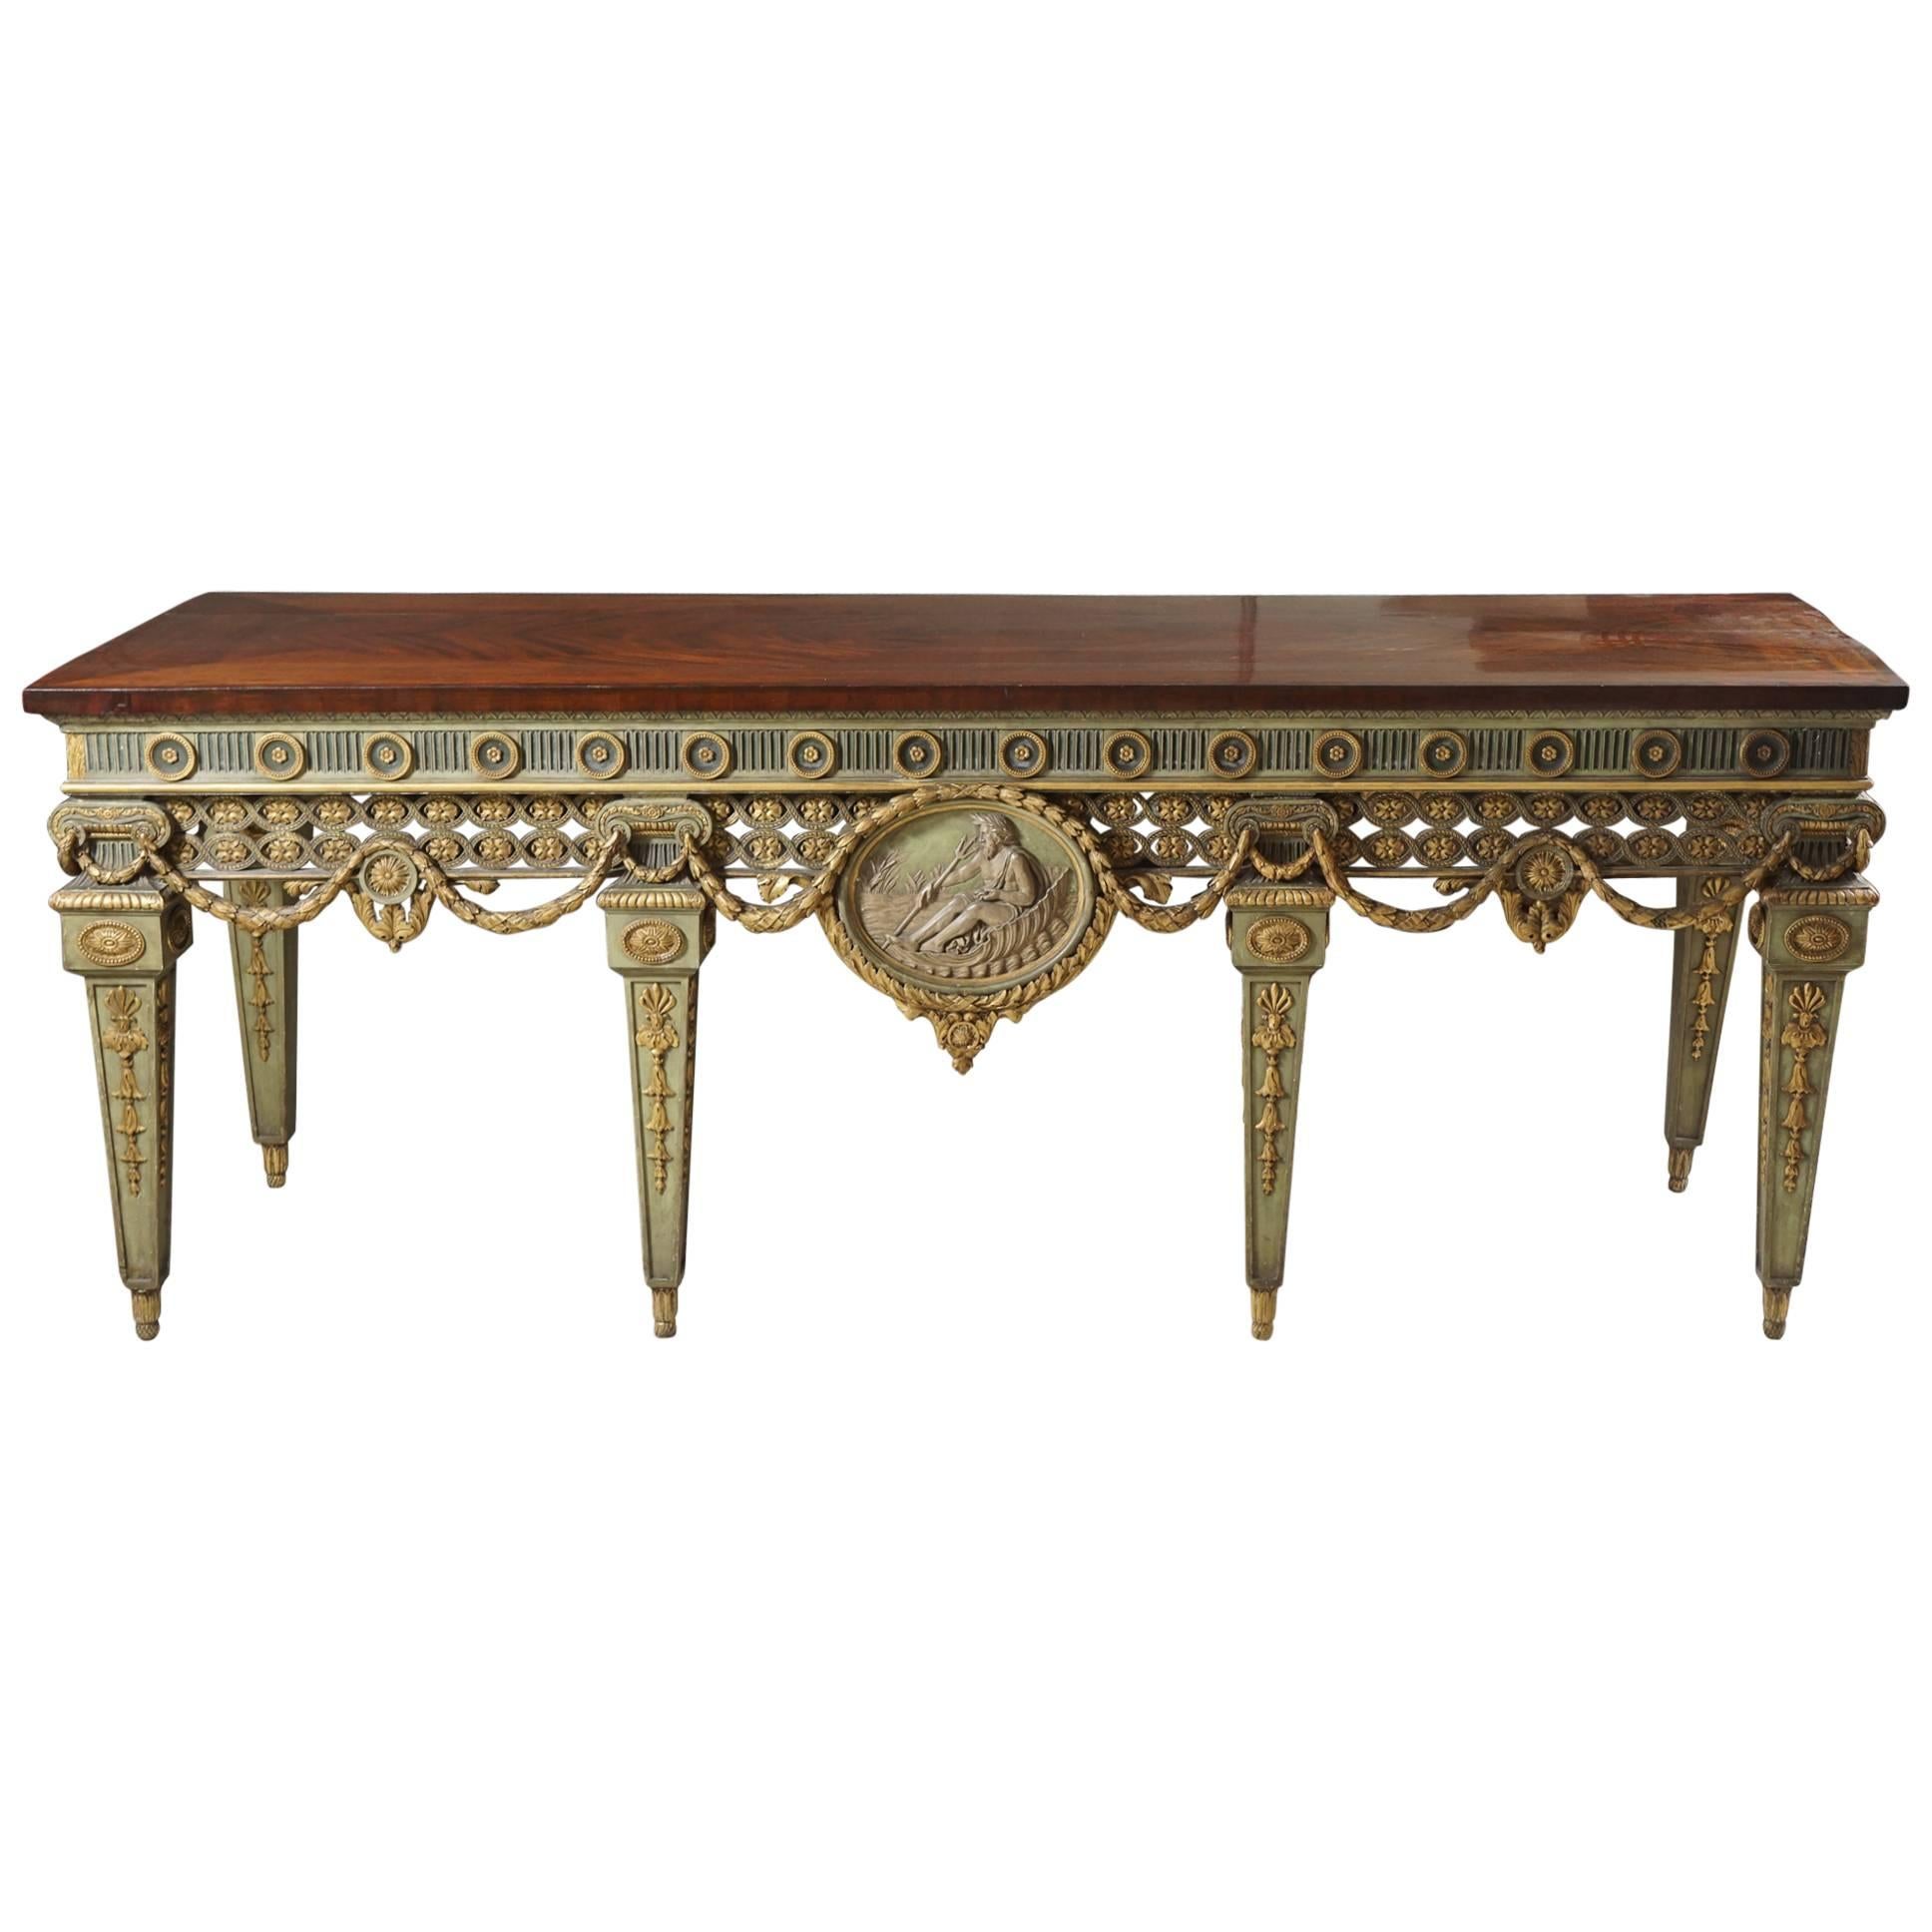 Large and Important Louis XVI Style Console Table from Blairsden House